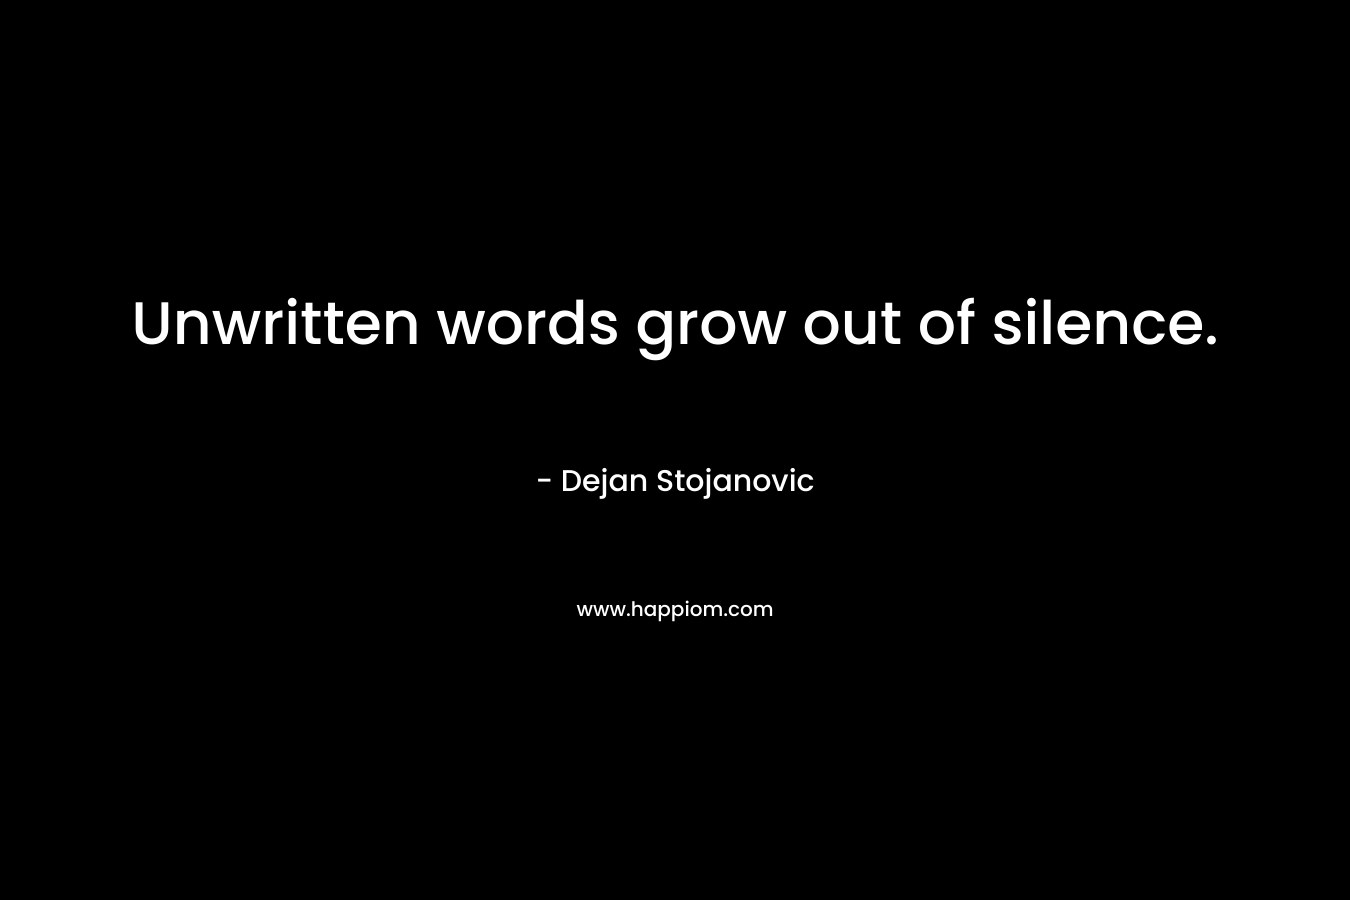 Unwritten words grow out of silence.